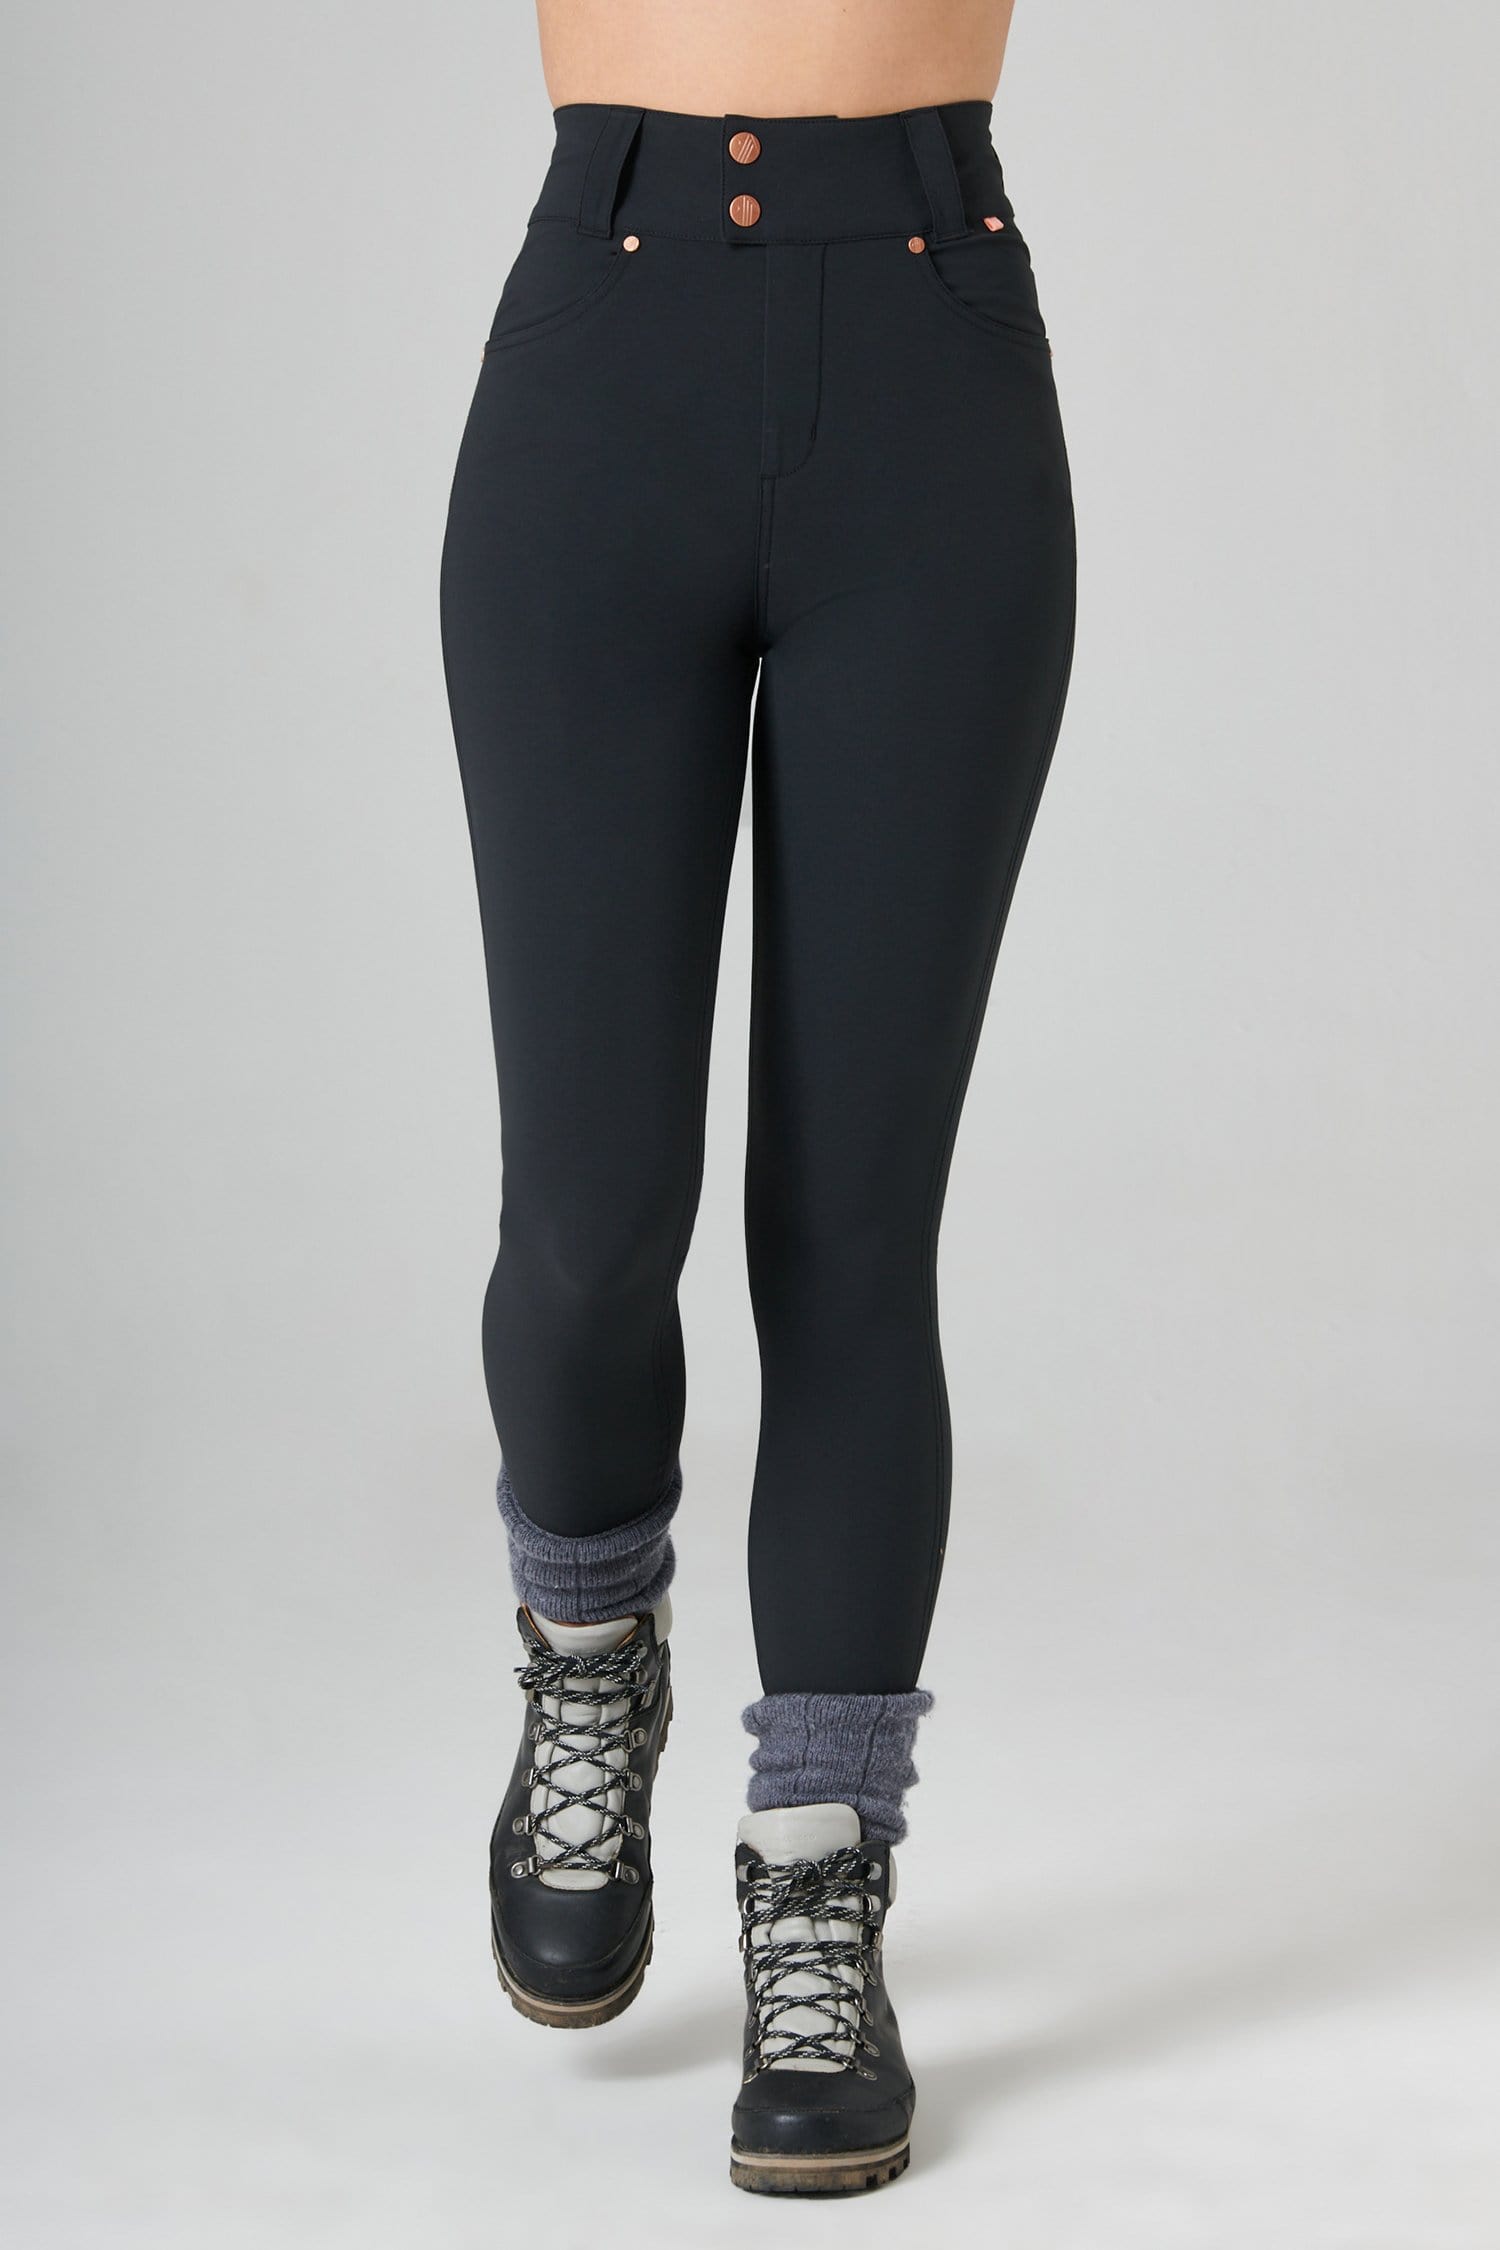 The Shape Skinny Outdoor Trousers - Black - 30r / Uk12 - Womens - Acai Outdoorwear